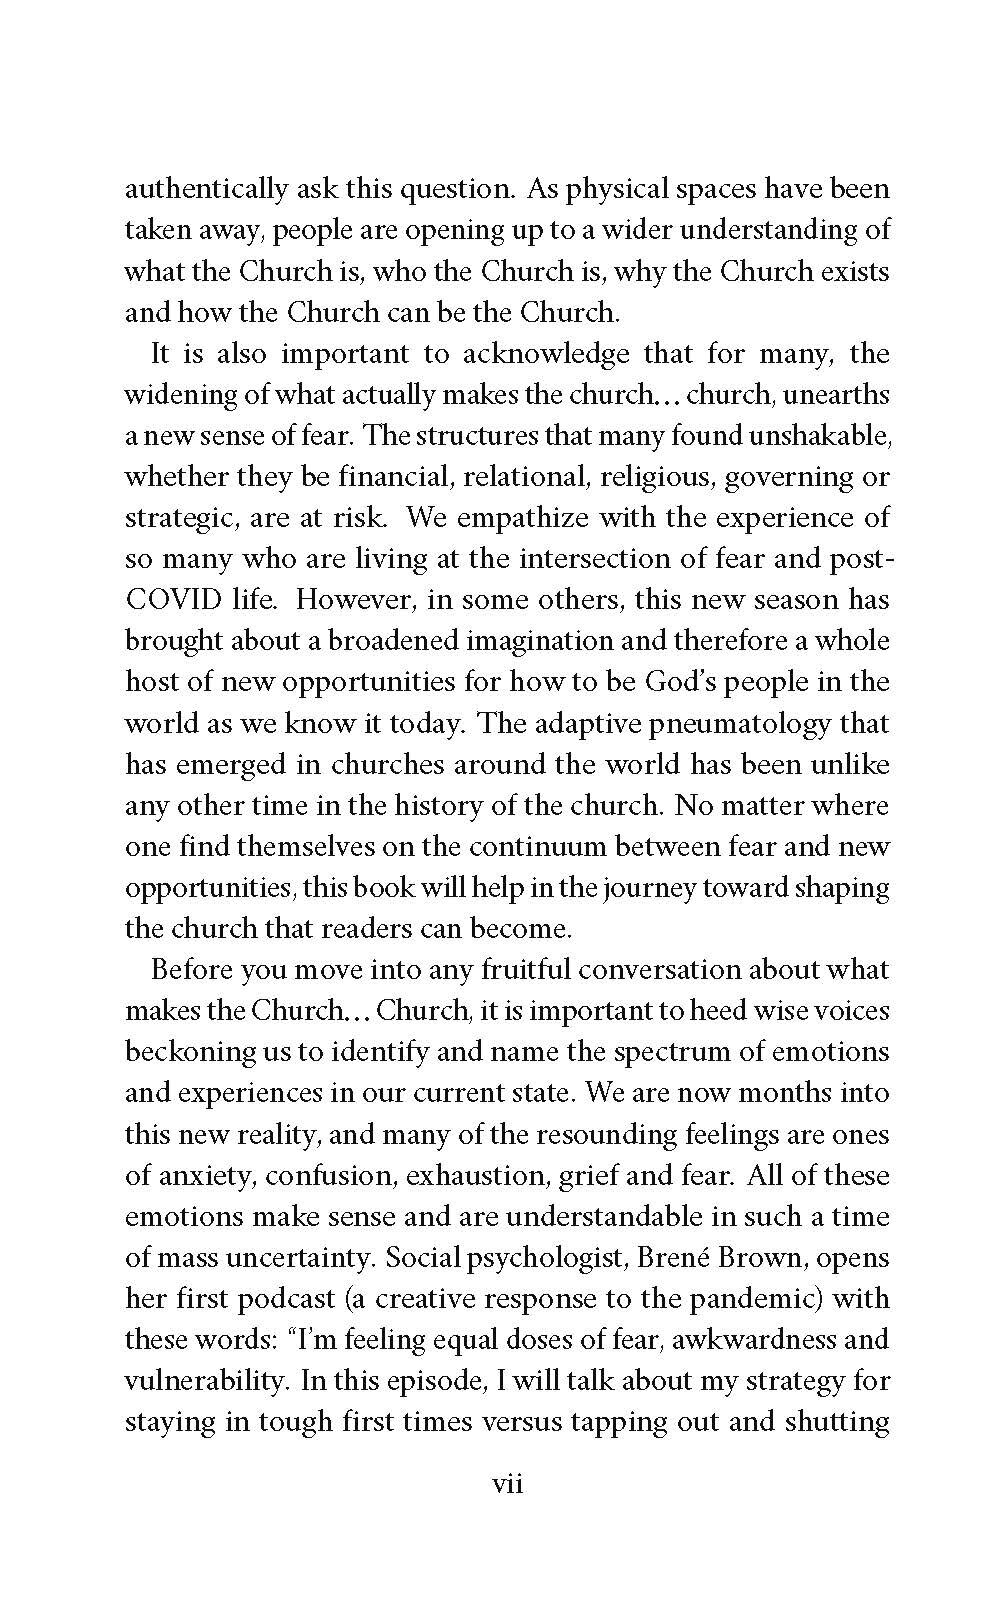 faithful-innovation reader preview_Page_13.jpg